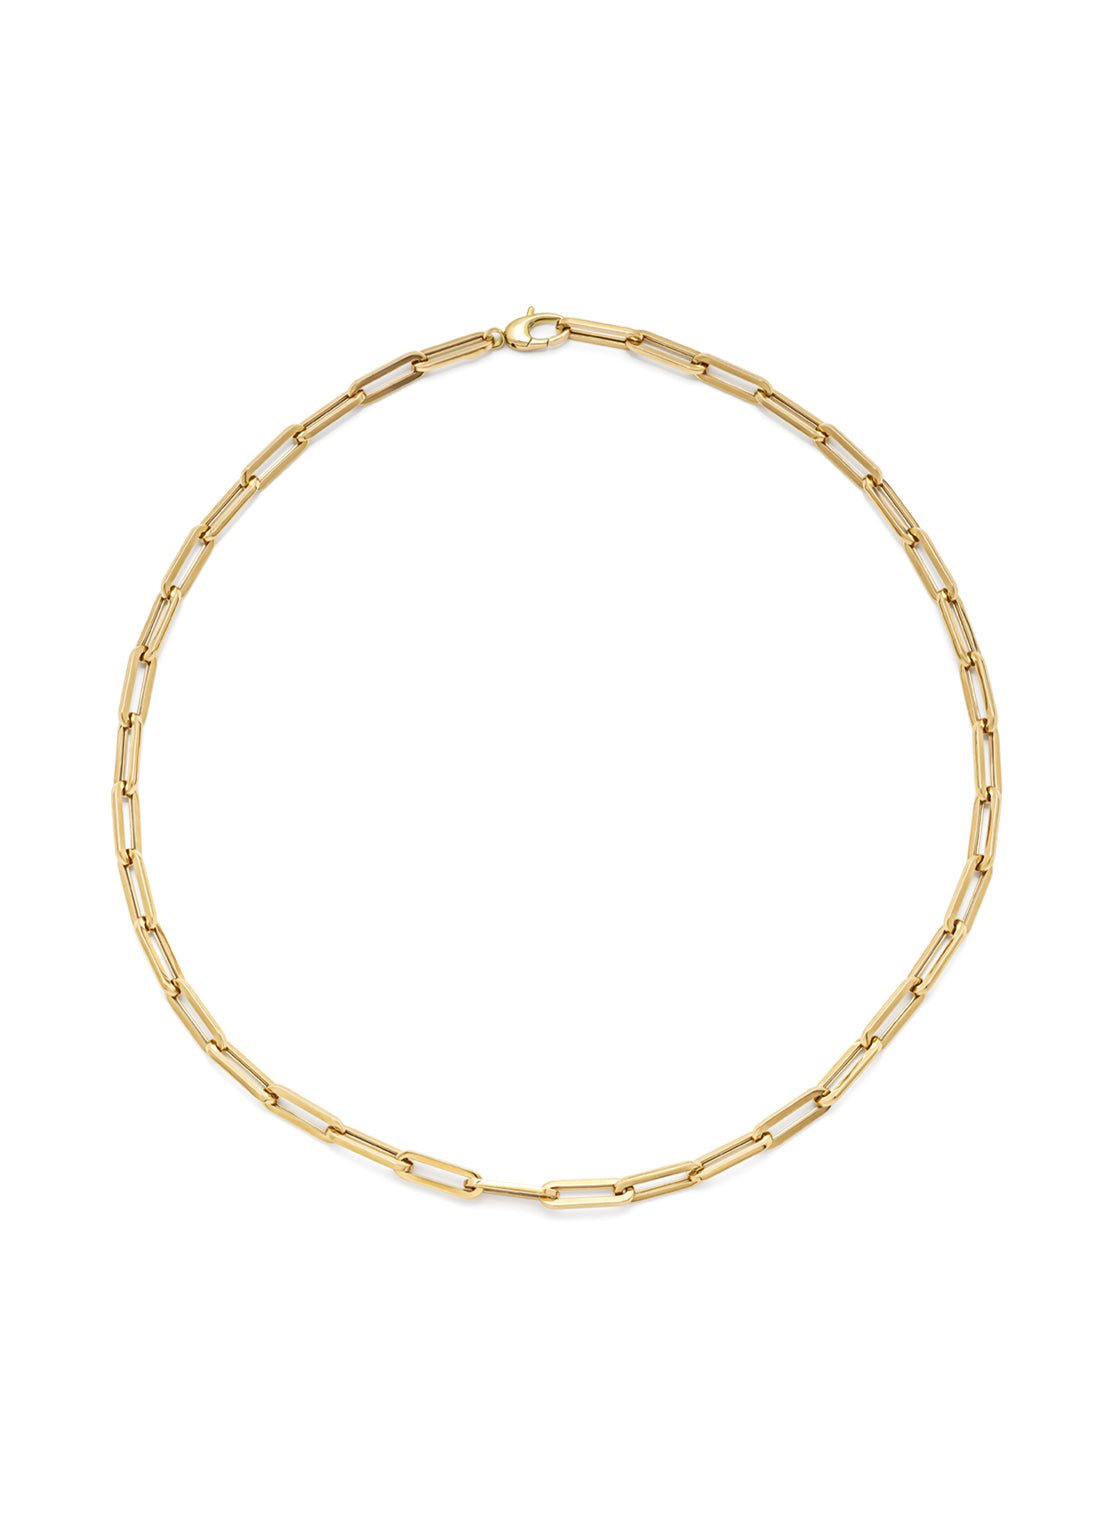 Yellow gold necklace closed forever 50 cm